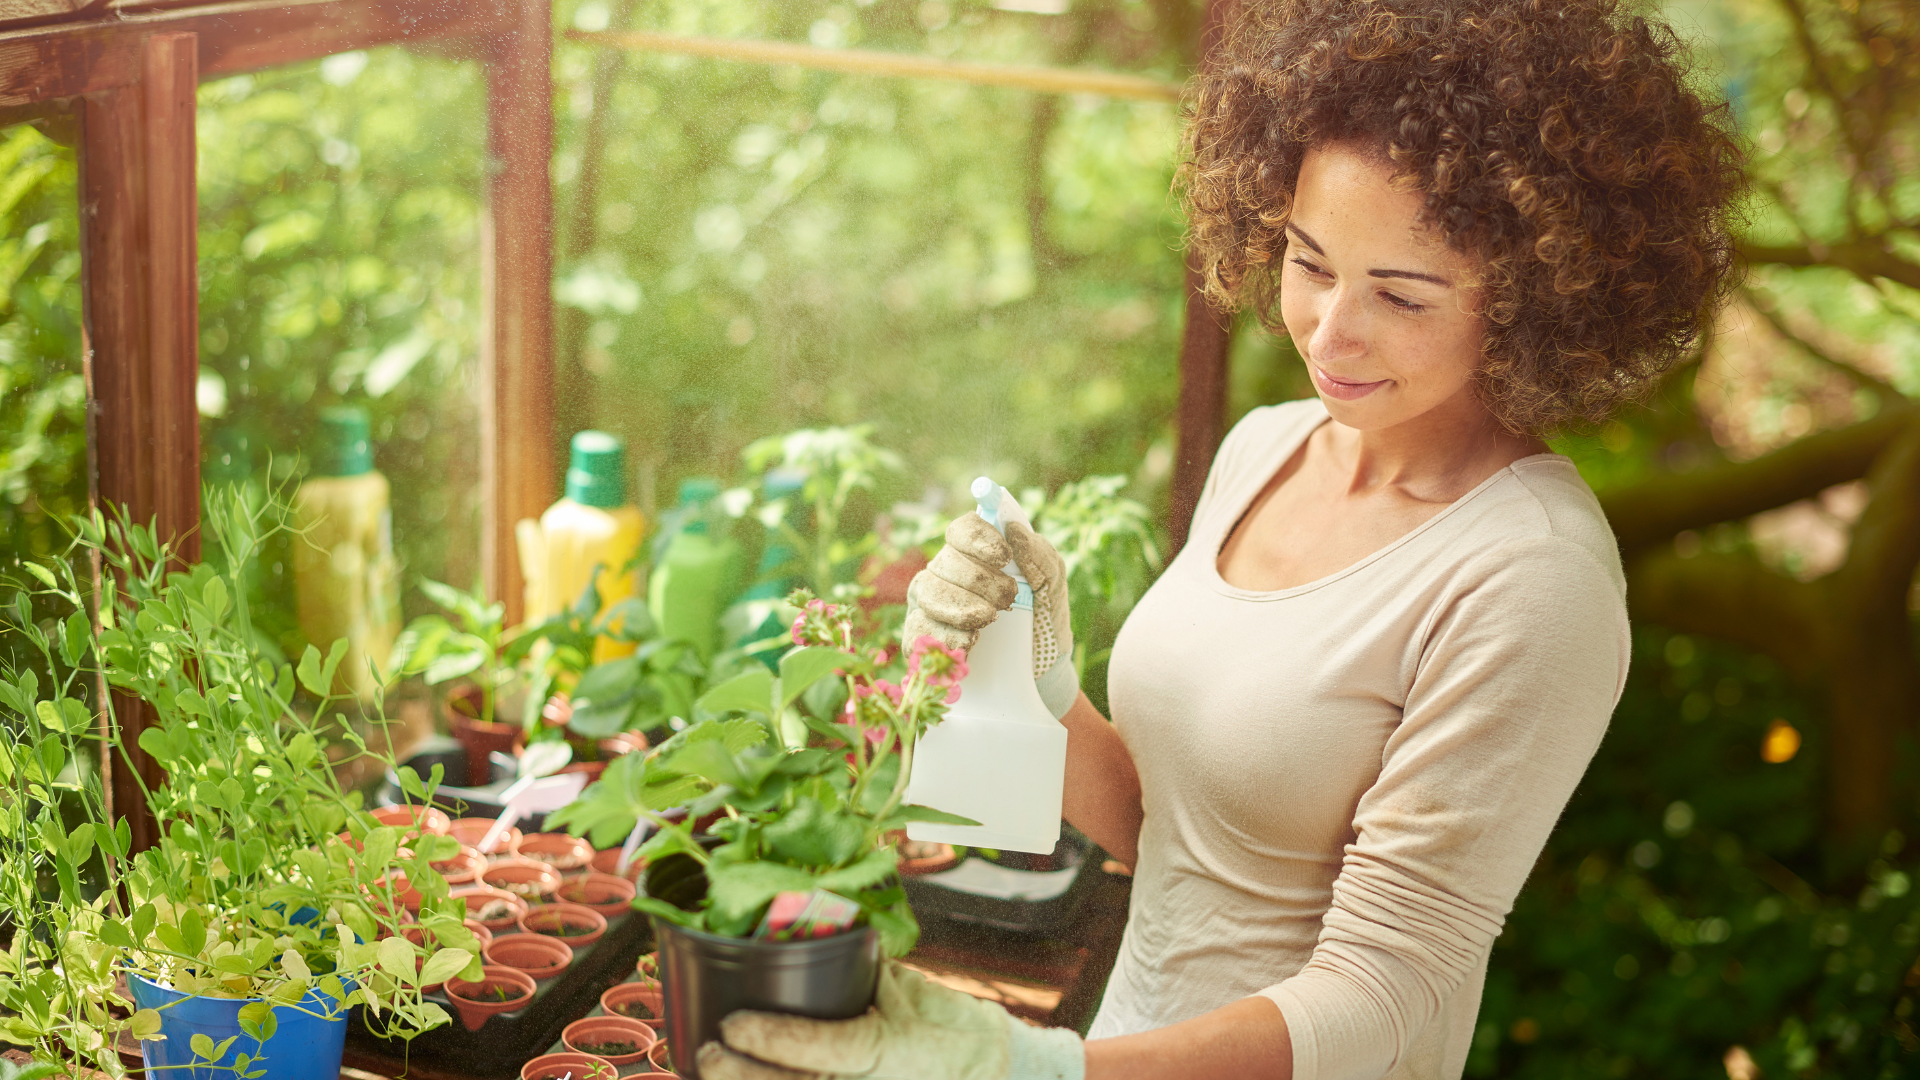 A woman is spraying seedlings with a water bottle. It’s clear that gardening brings her joy.